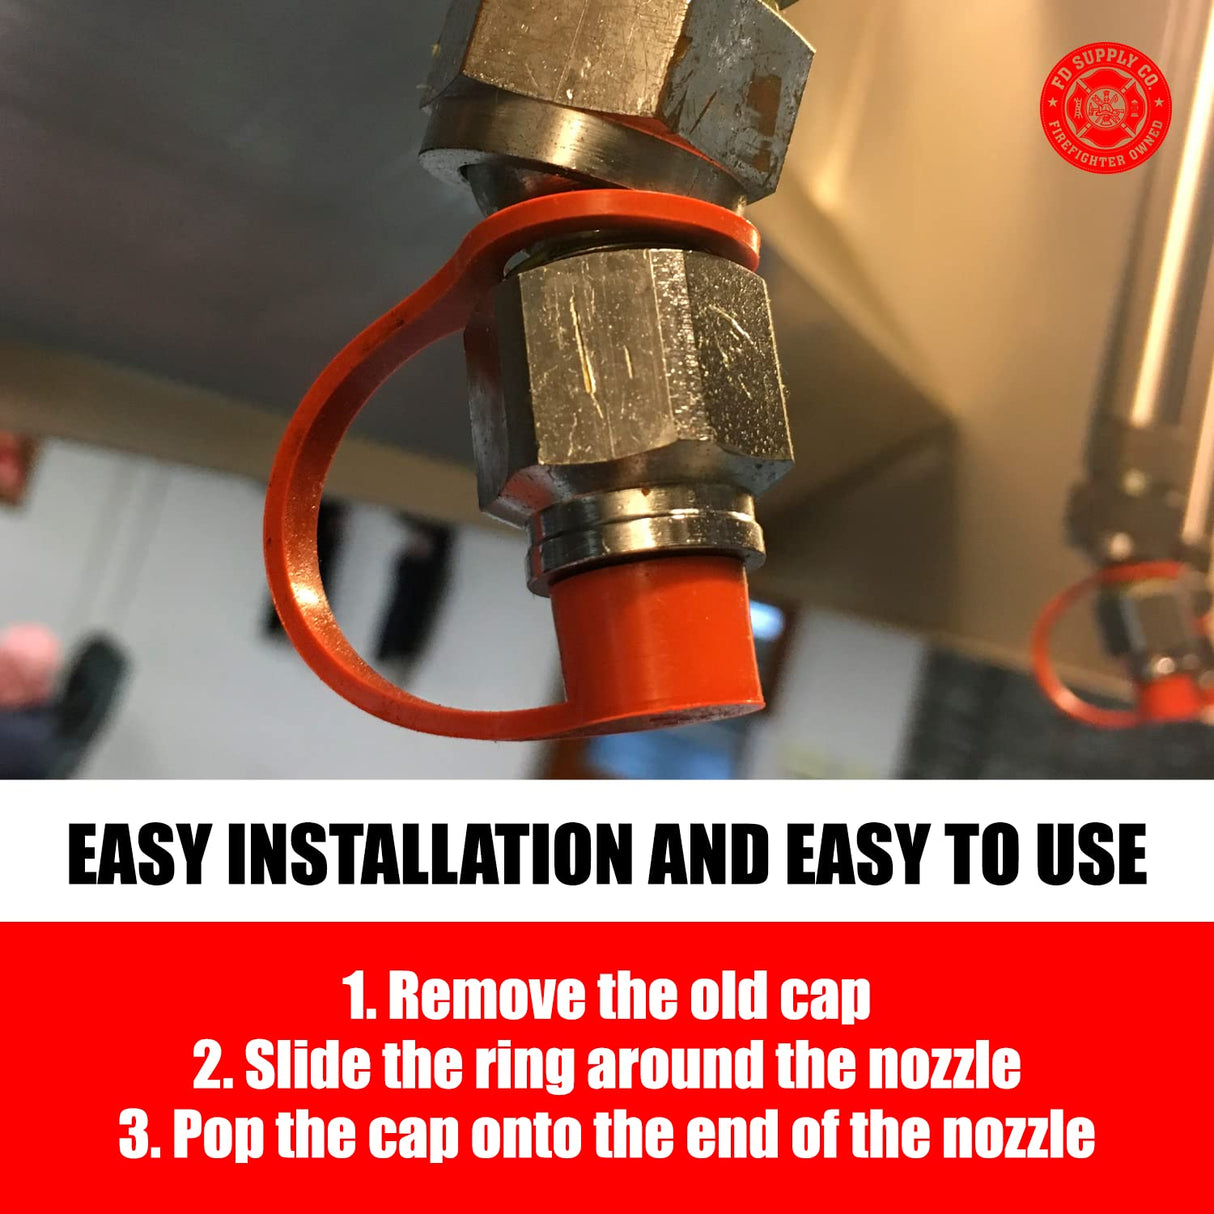 Rubber Blow Off Caps for Ansul R102 and Piranha Industrial Kitchen Suppression Vent A Hood Systems – Fire Suppression Nozzles – Grease Caps Kit (20 Caps)